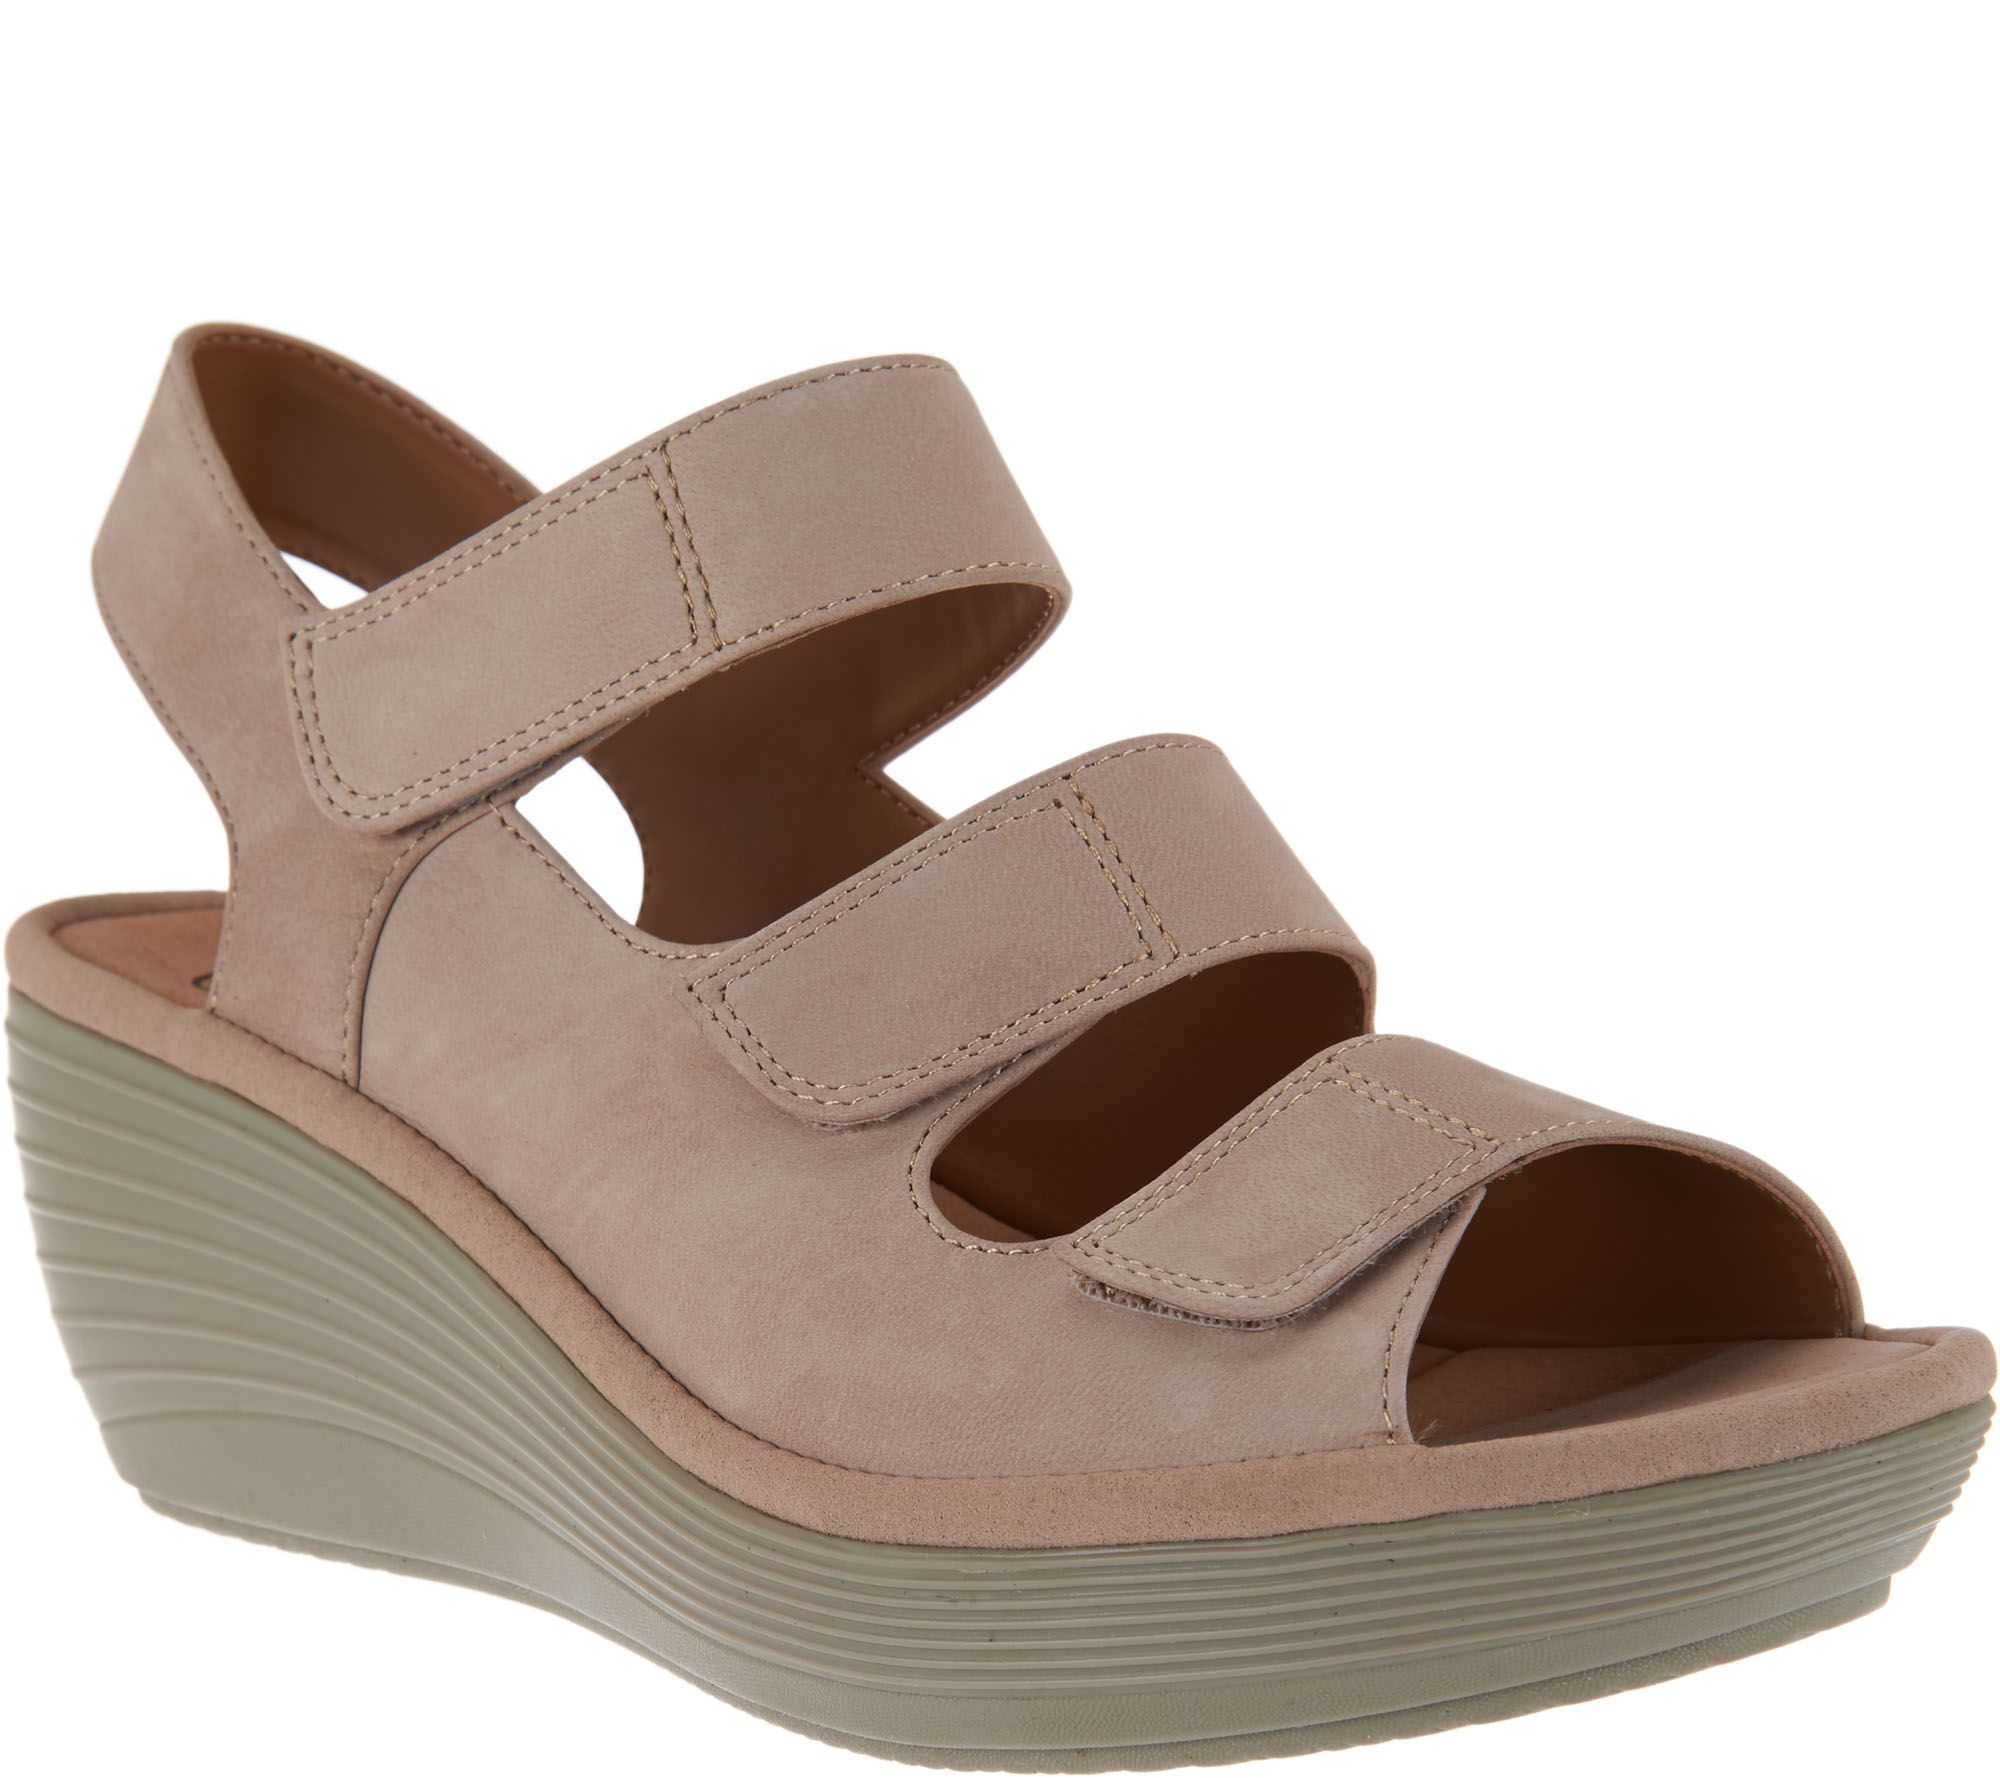 clarks wedge sandals on qvc